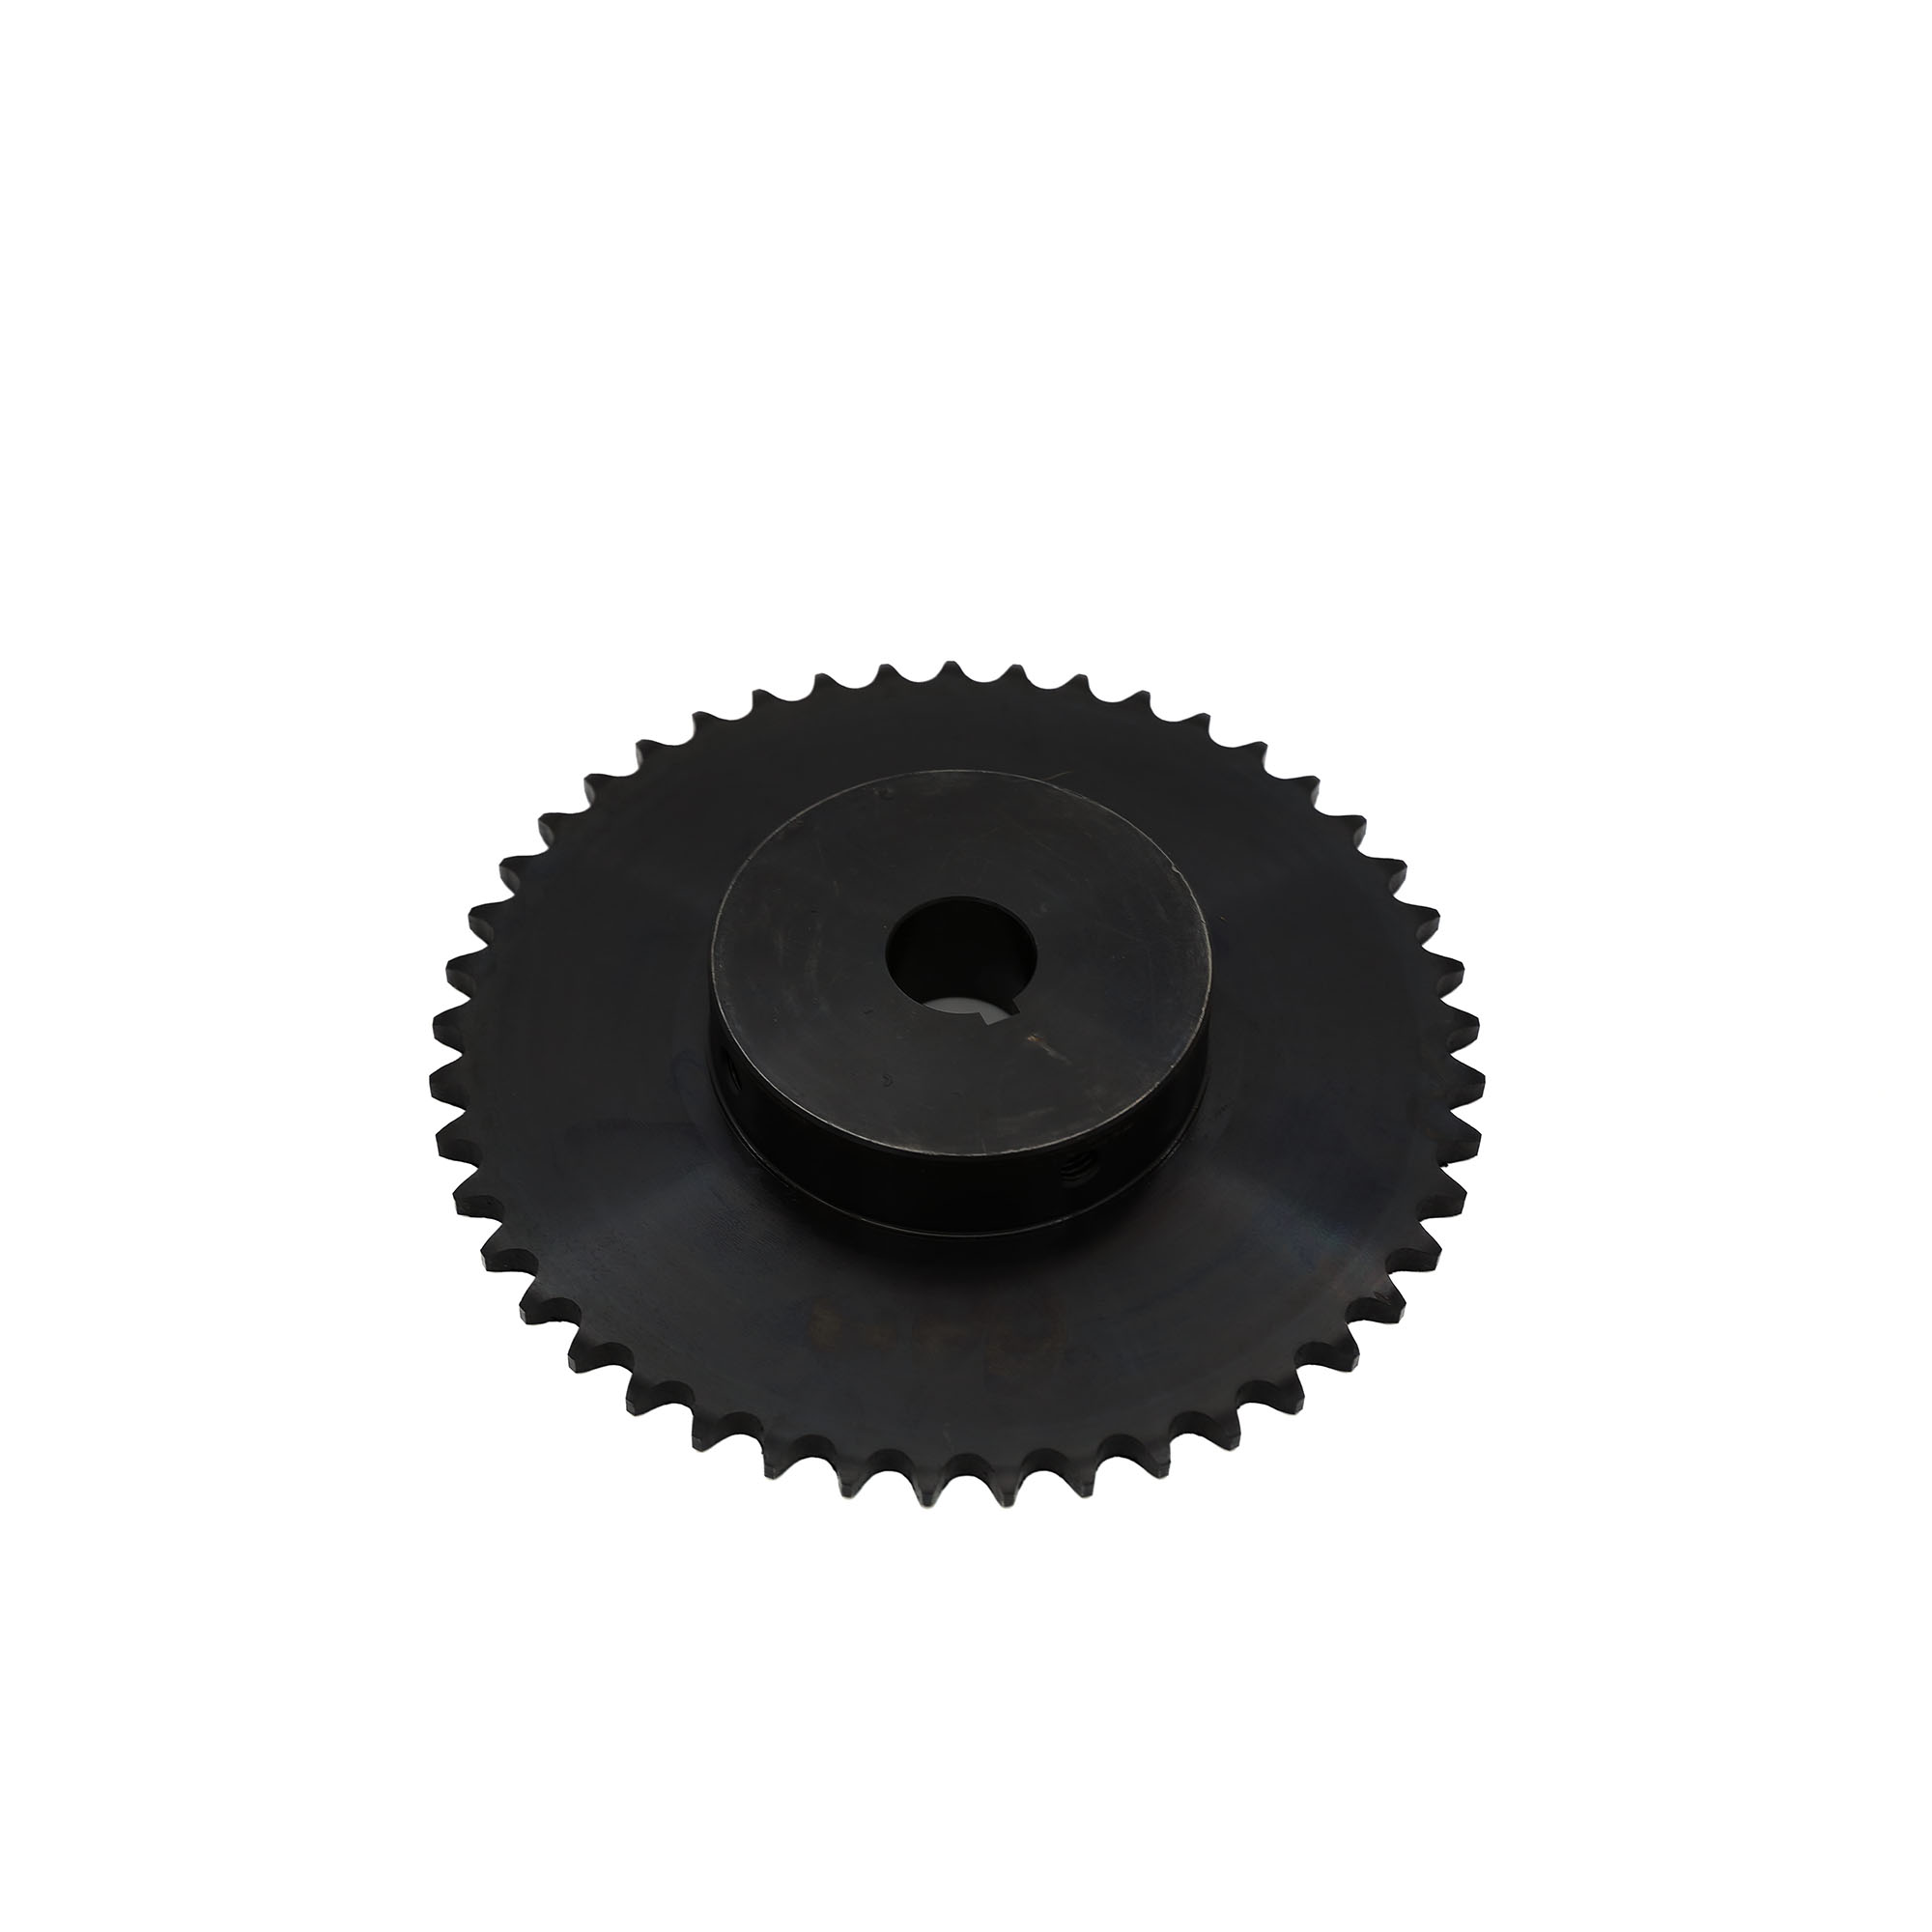 Cabinet Sandblaster Parts, Parts Washer Replacement Parts, Parts & Accessories, Turntable Sprocket Drive, 5711 Sprocket Drive, American Hawk Industrial, Dee-Blast